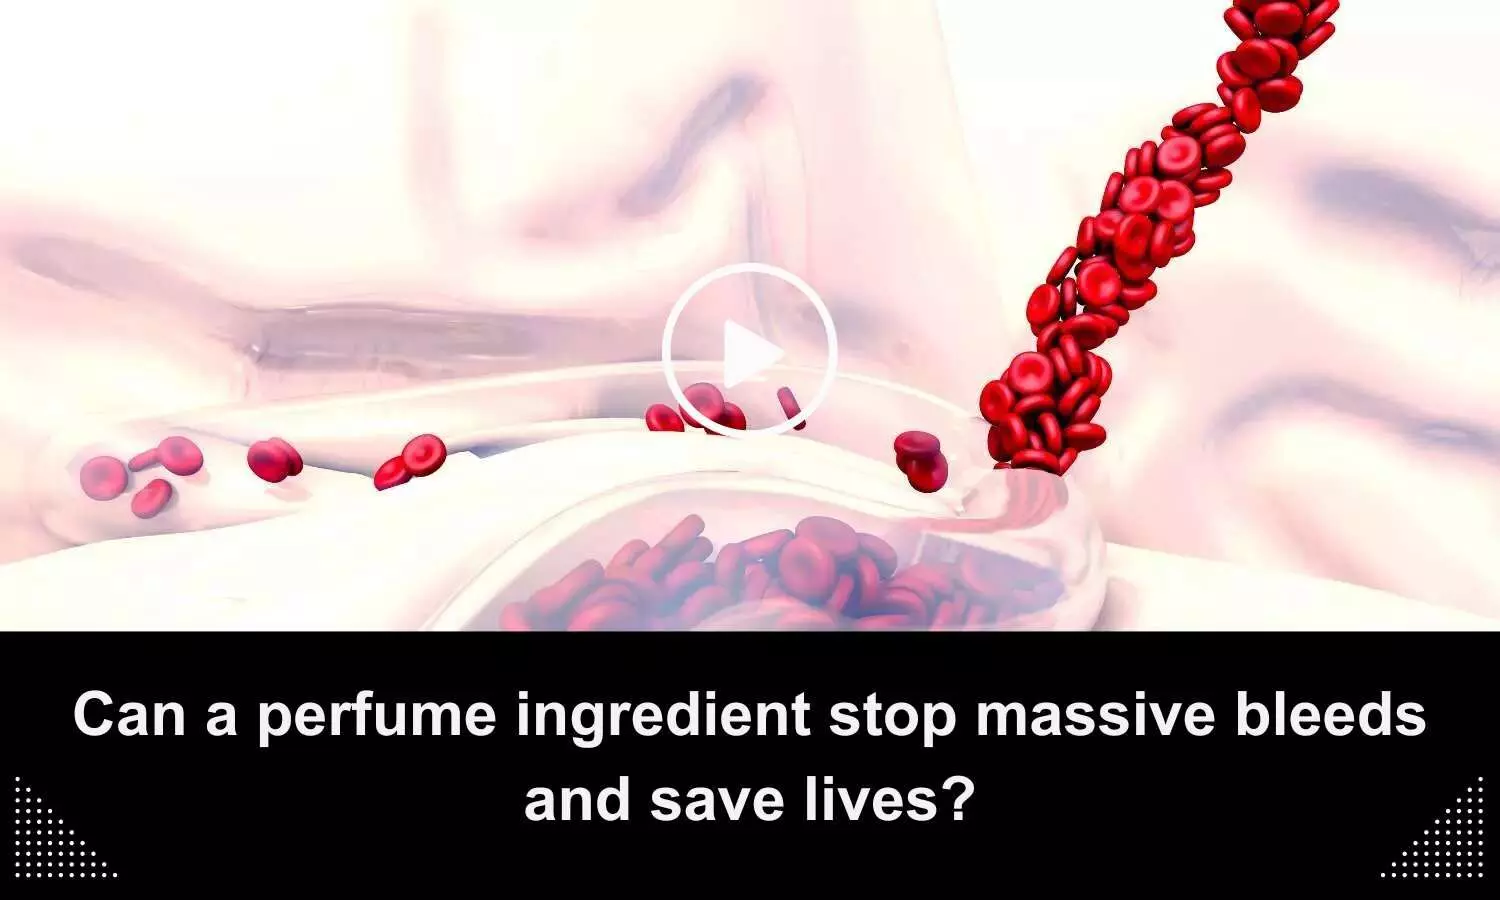 Can a perfume ingredient stop massive bleeds and save lives?